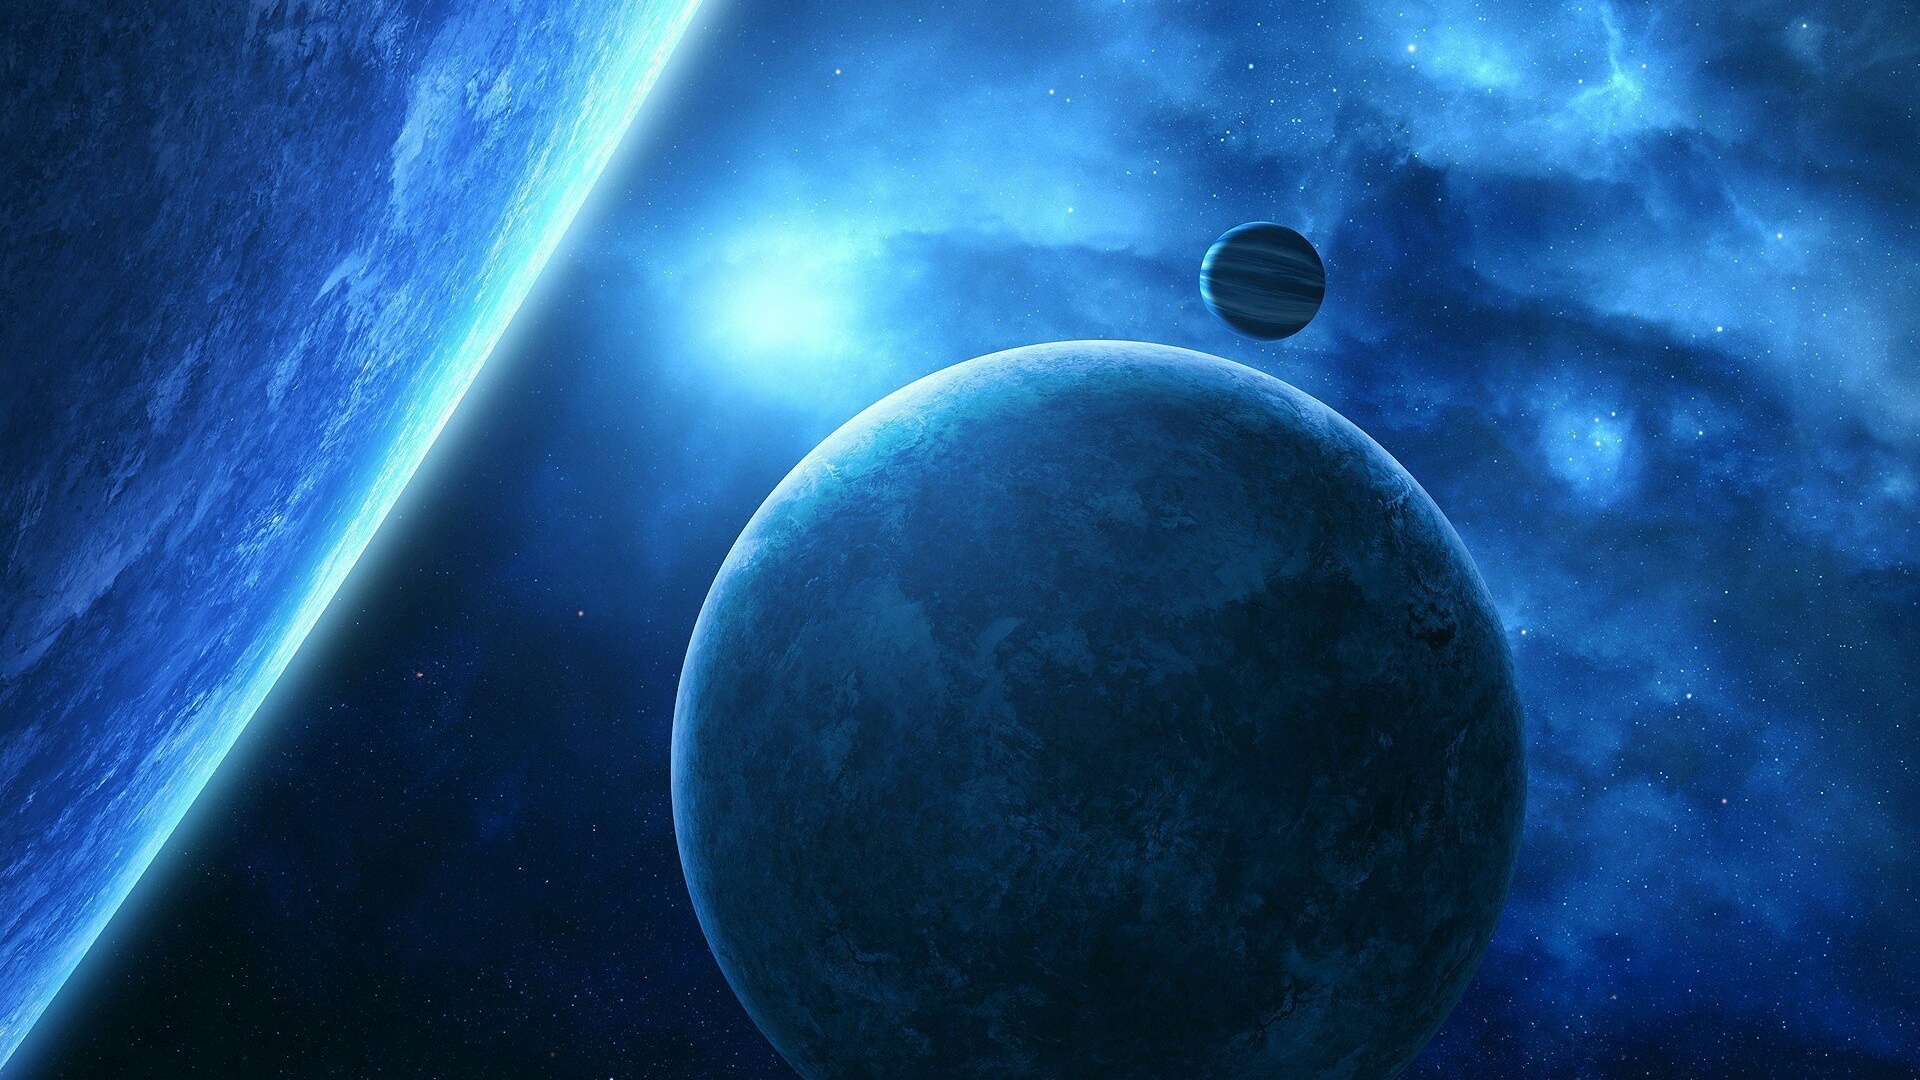 Wallpapers earth gas planet on the desktop